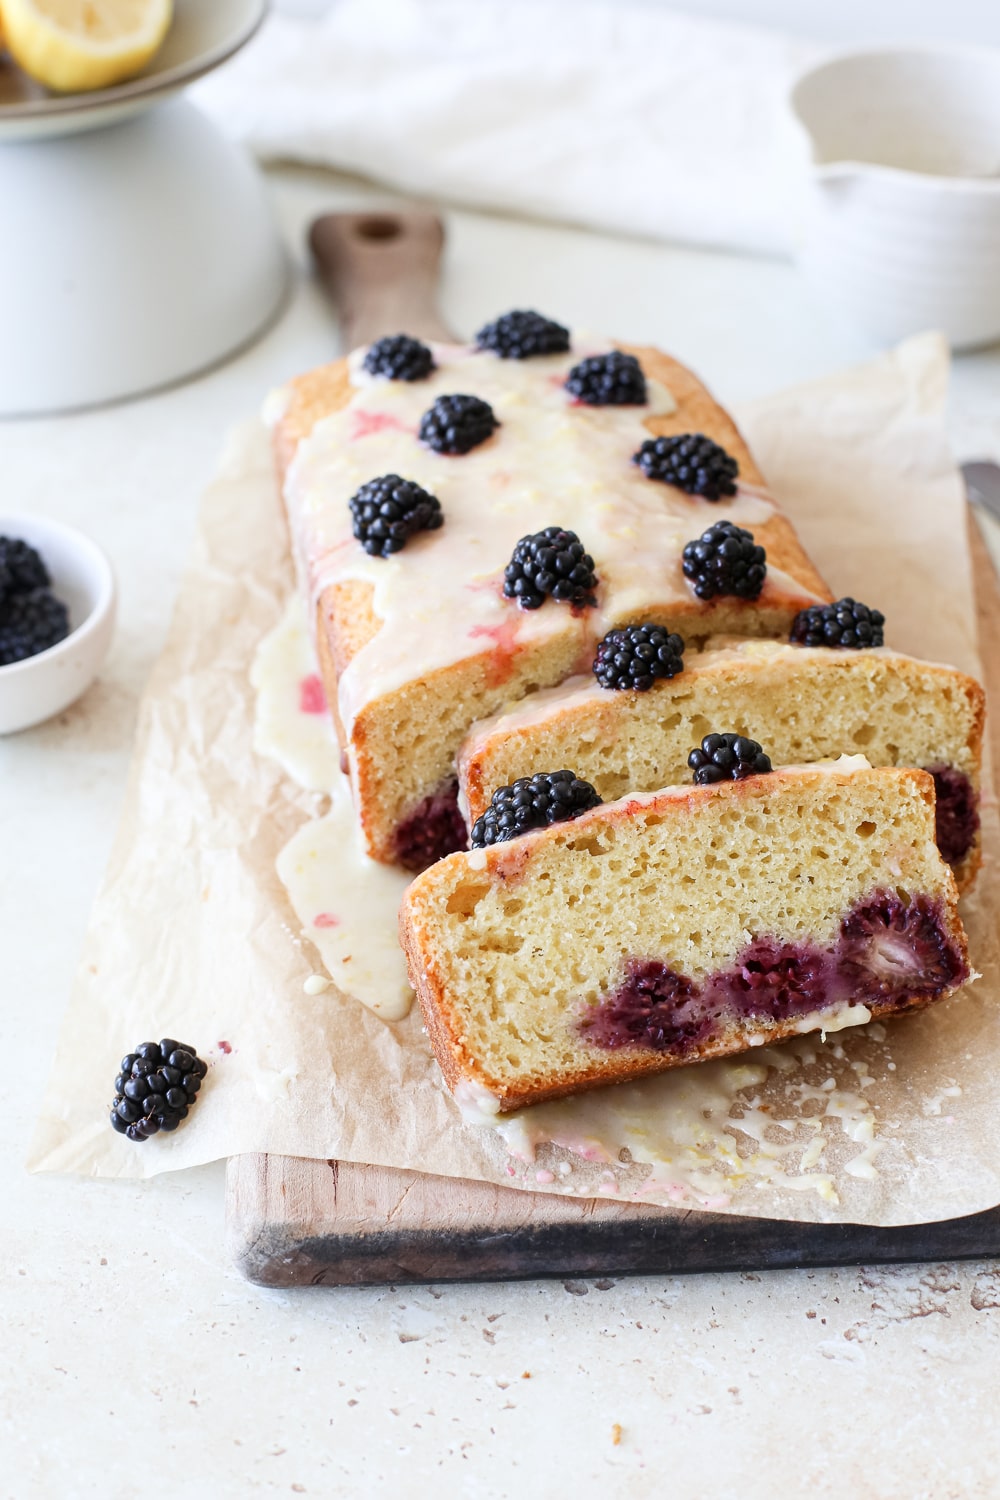 Slices of lemon blackberry bread on a parchment paper lined wooden cutting board.